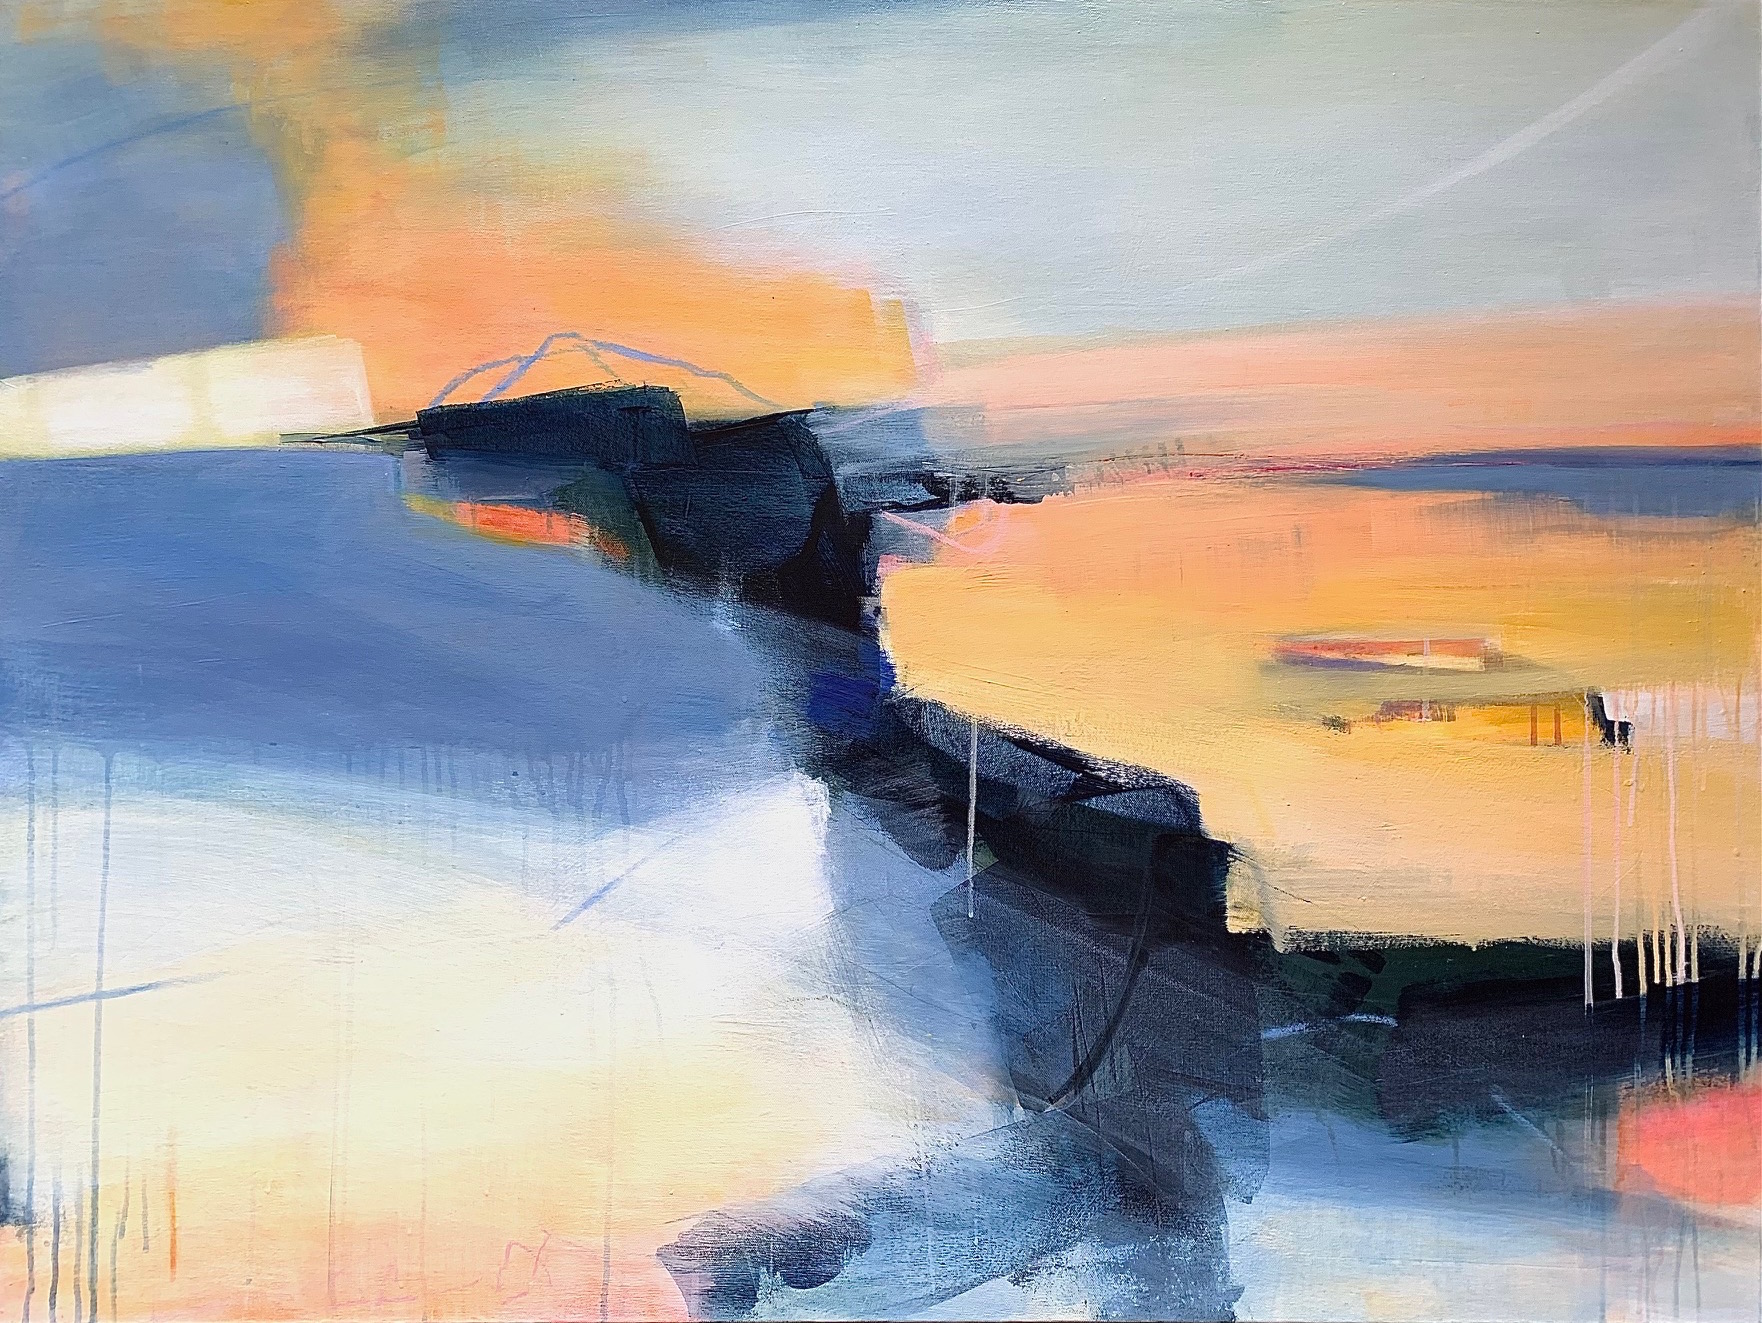 This striking abstract landscape painted with blues and yellows reminded me of the sweep of birds' wings.